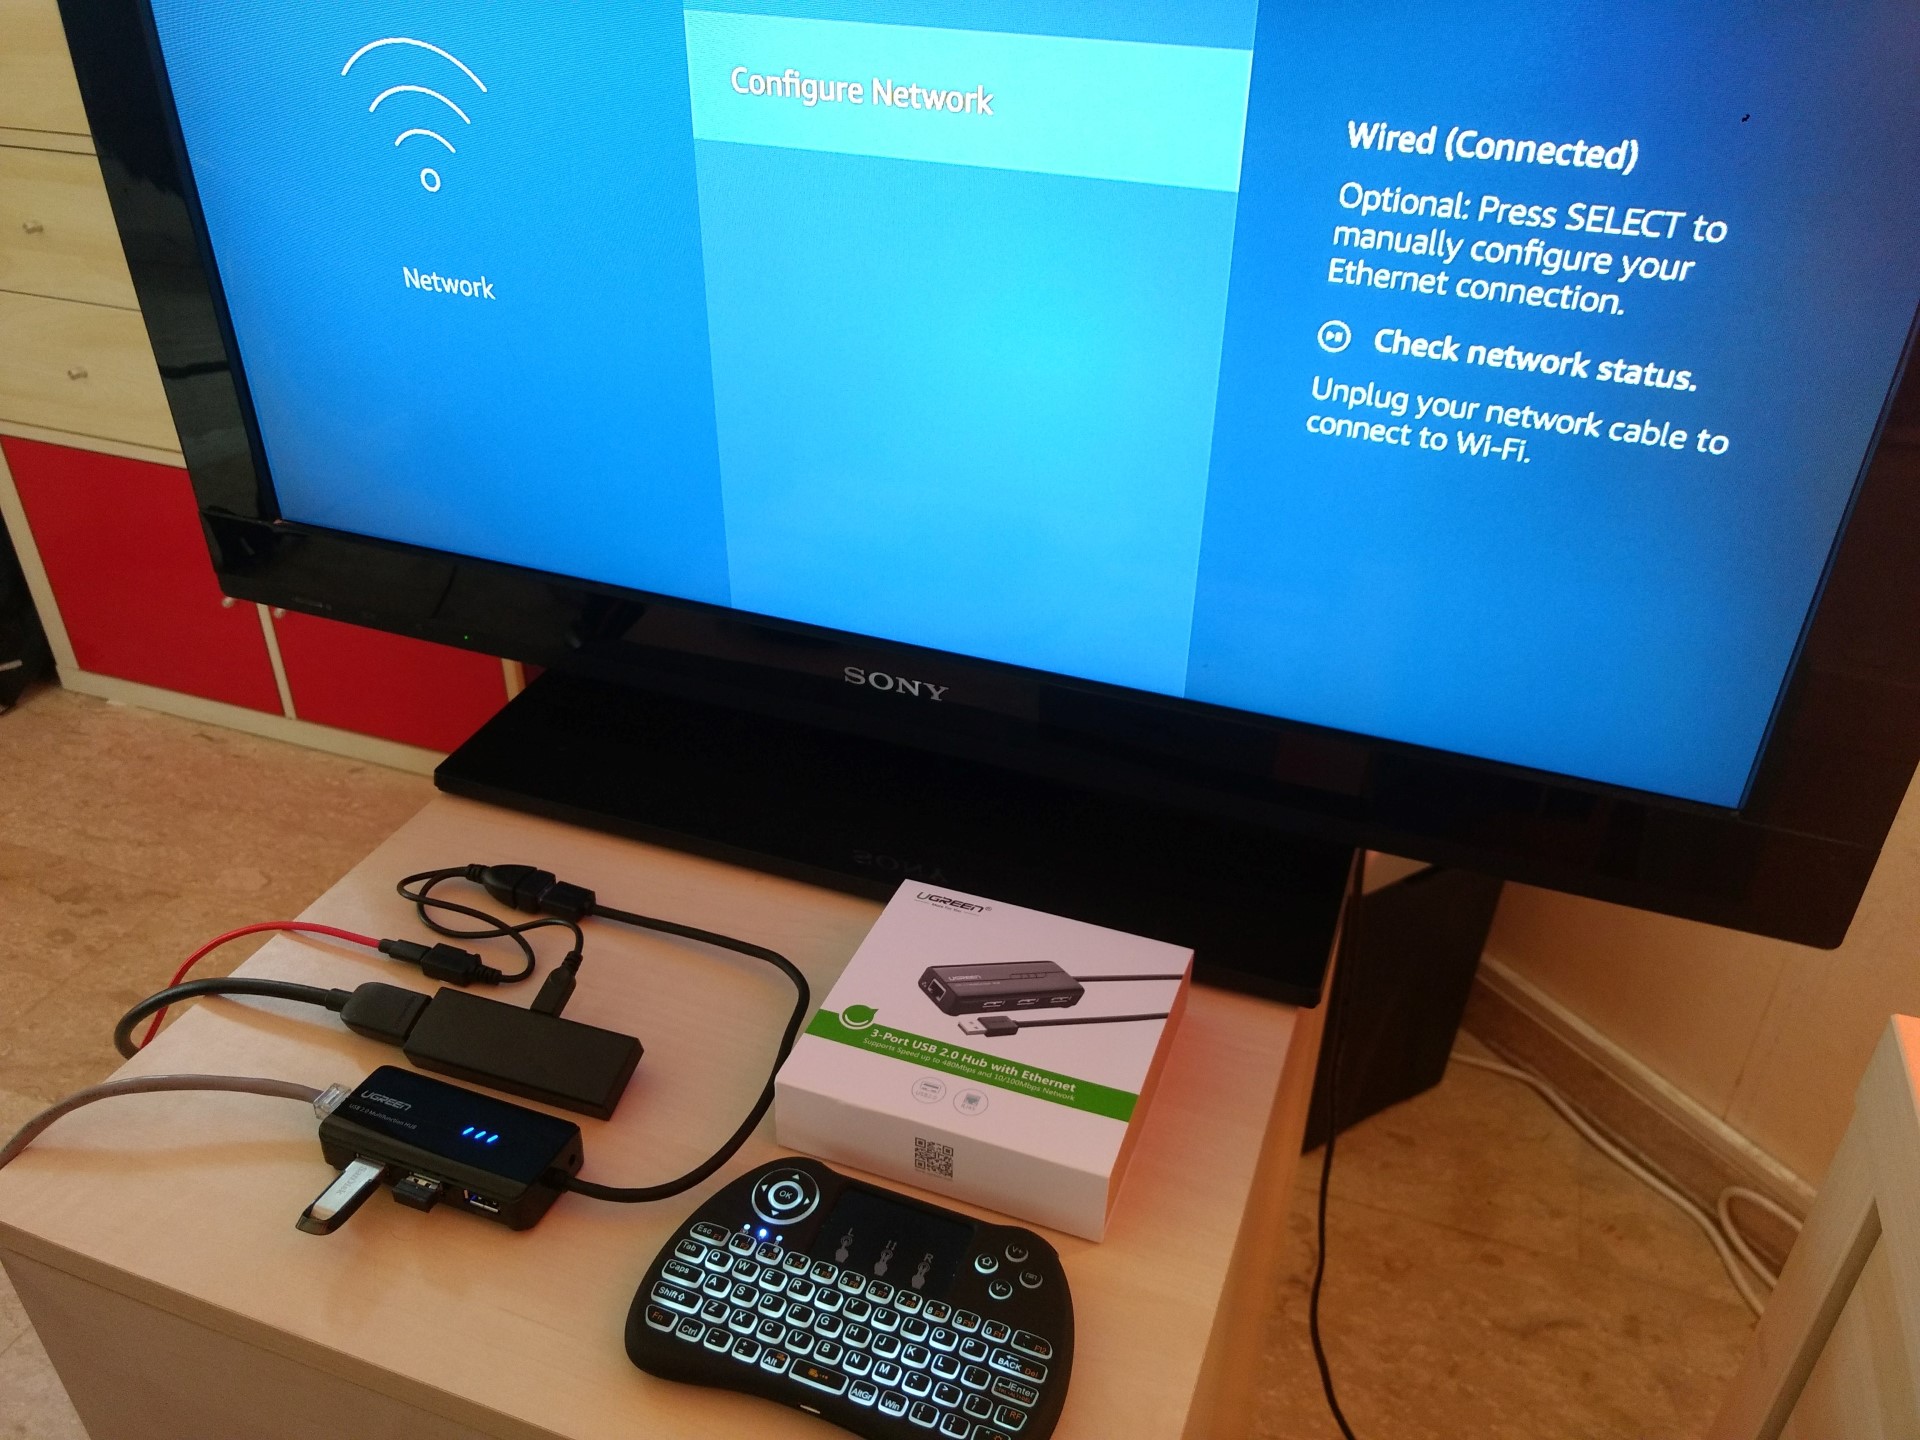 Fire TV Stick with wired Ethernet, keyboard, mouse and external